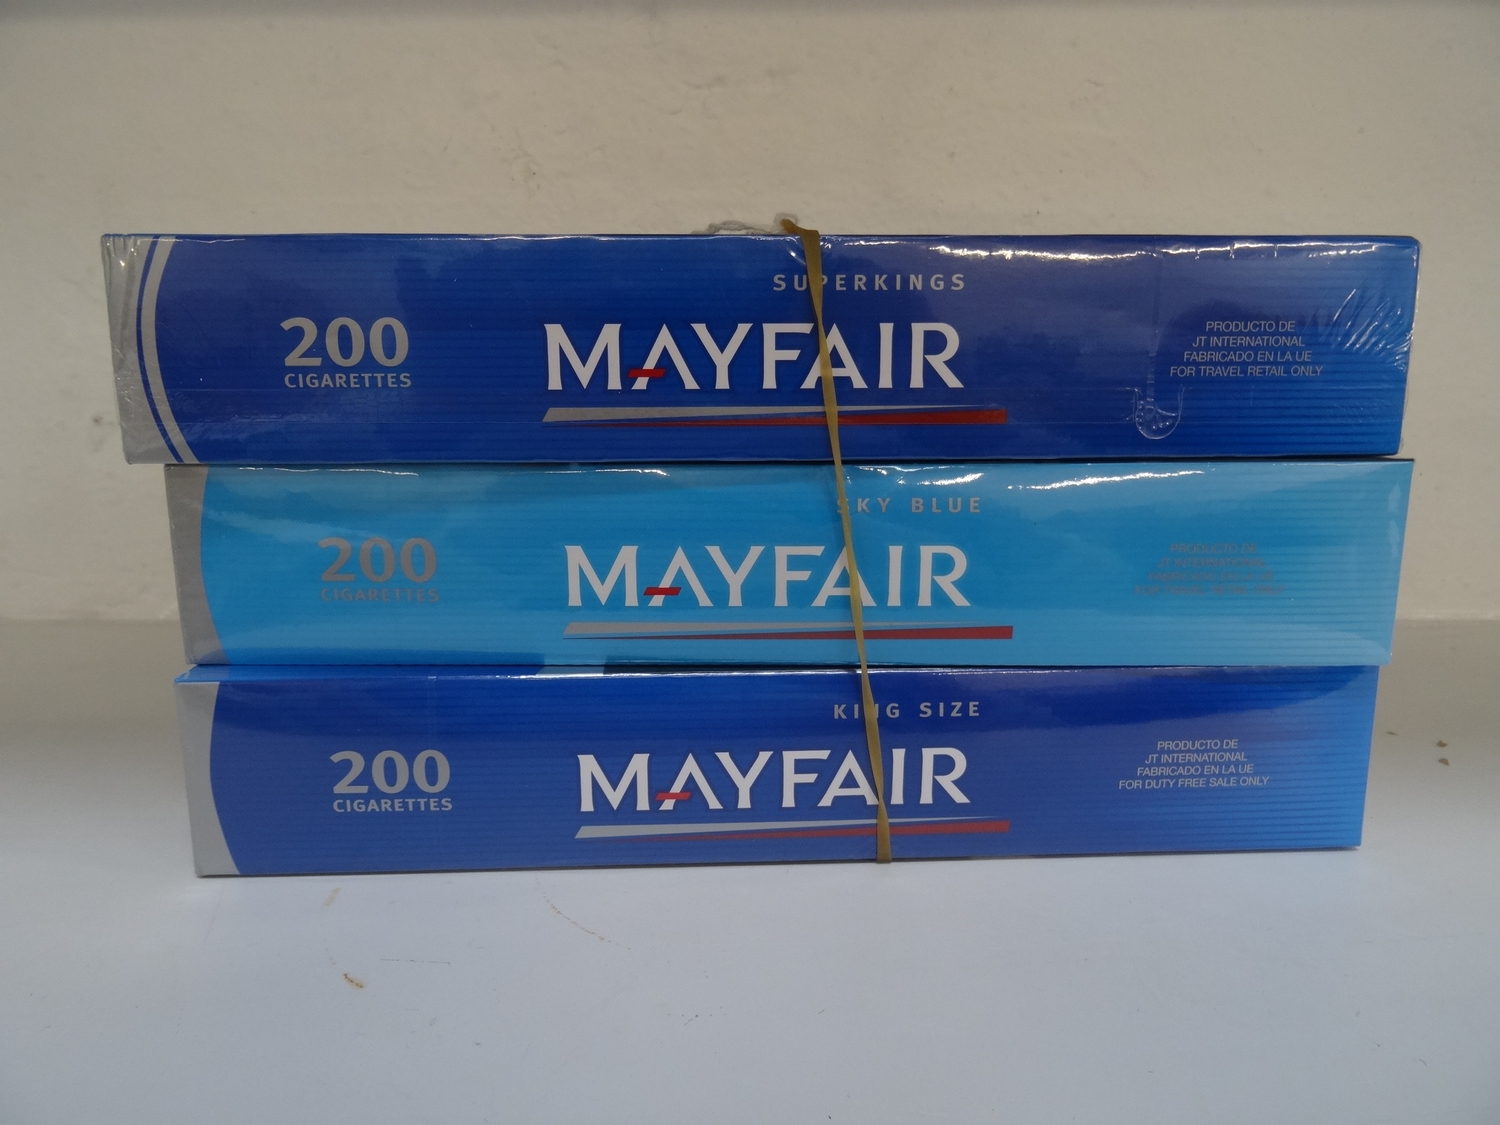 Selection Of 600 Mayfair Cigarettes Comprising 200 X Superkings 200 X King Size And 200 X Sky Blue